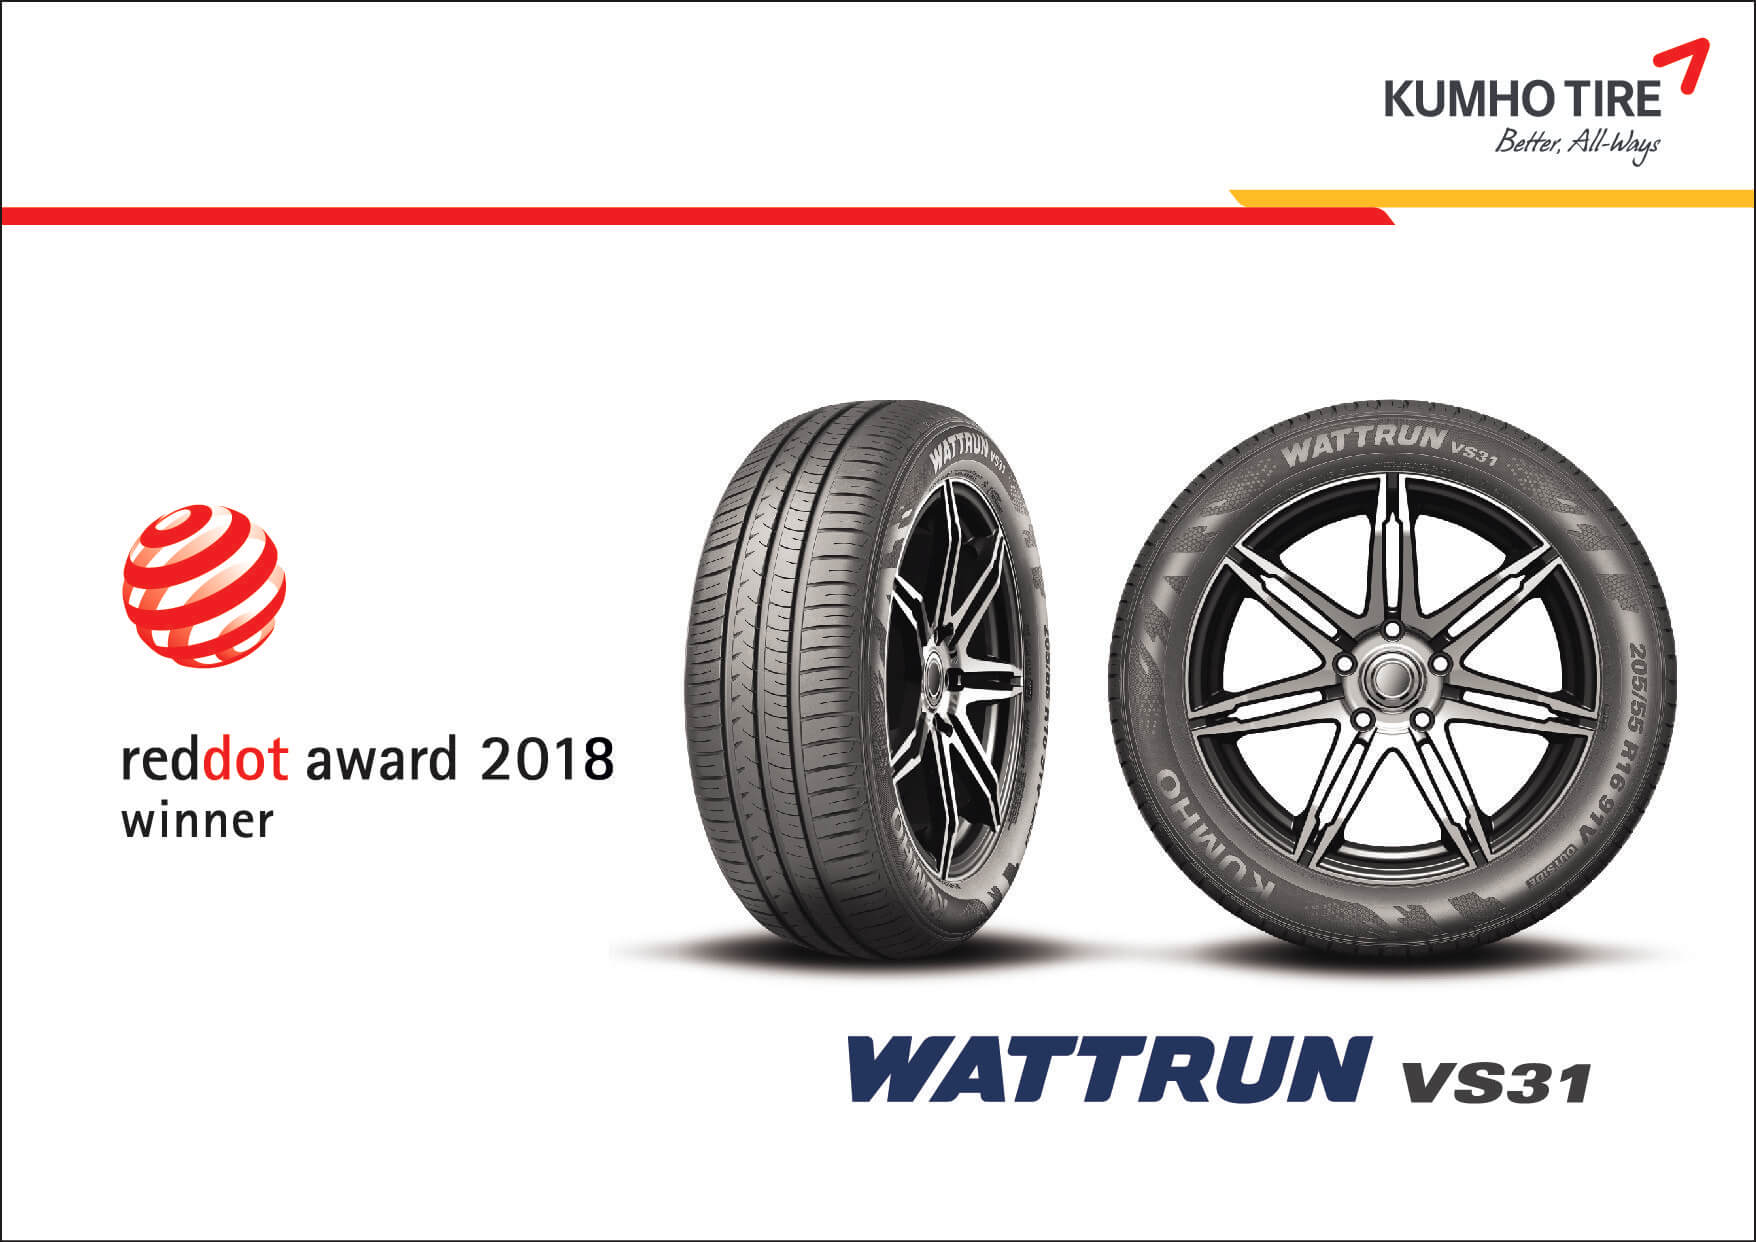 WATTRUN tyres by Kumho have been EV focused since 2013.